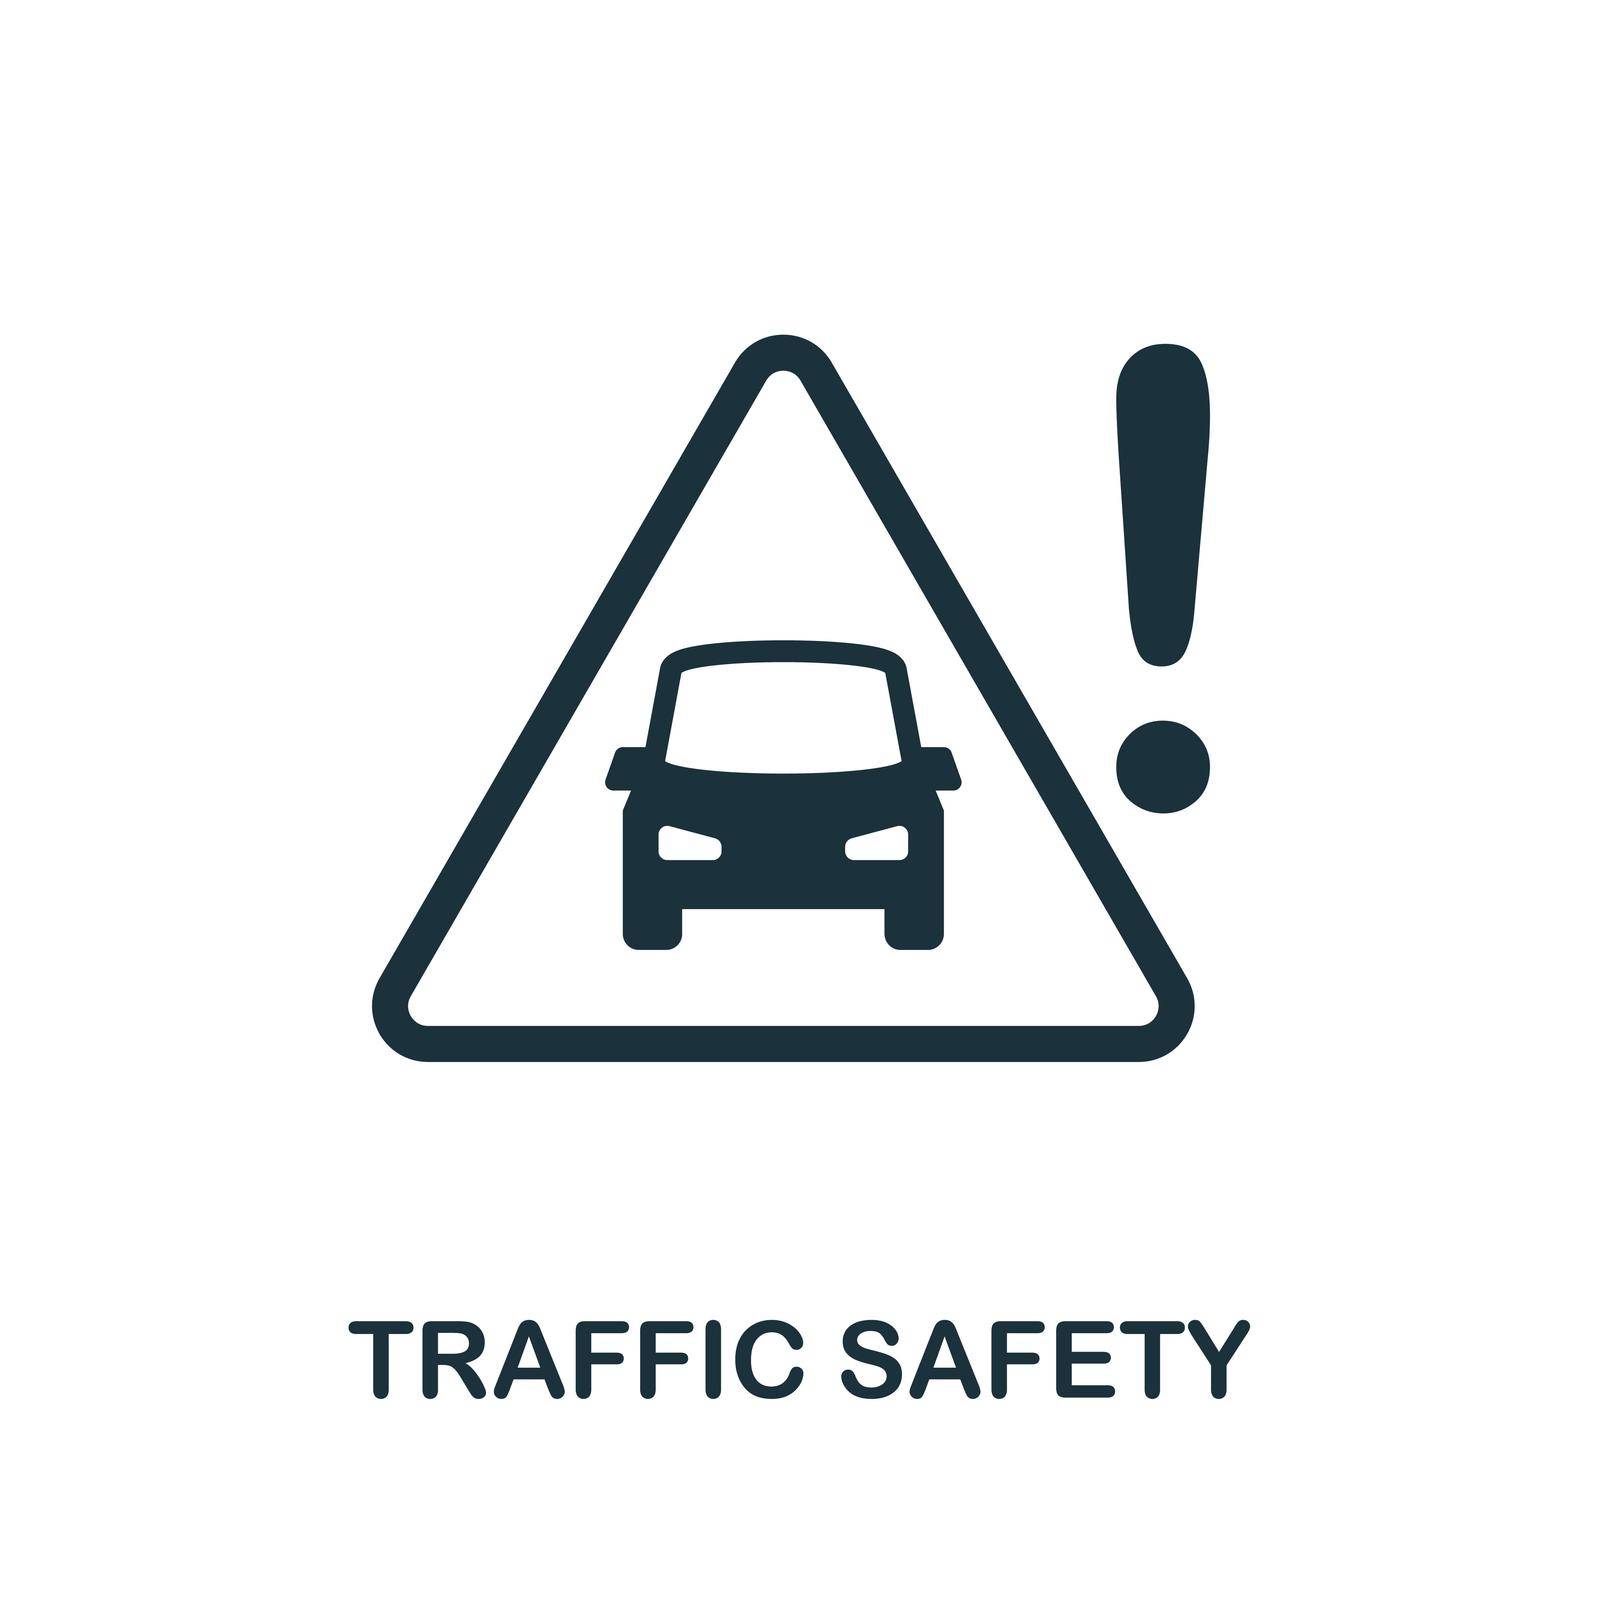 Traffic Safety icon. Monochrome simple Traffic Safety icon for templates, web design and infographics by simakovavector